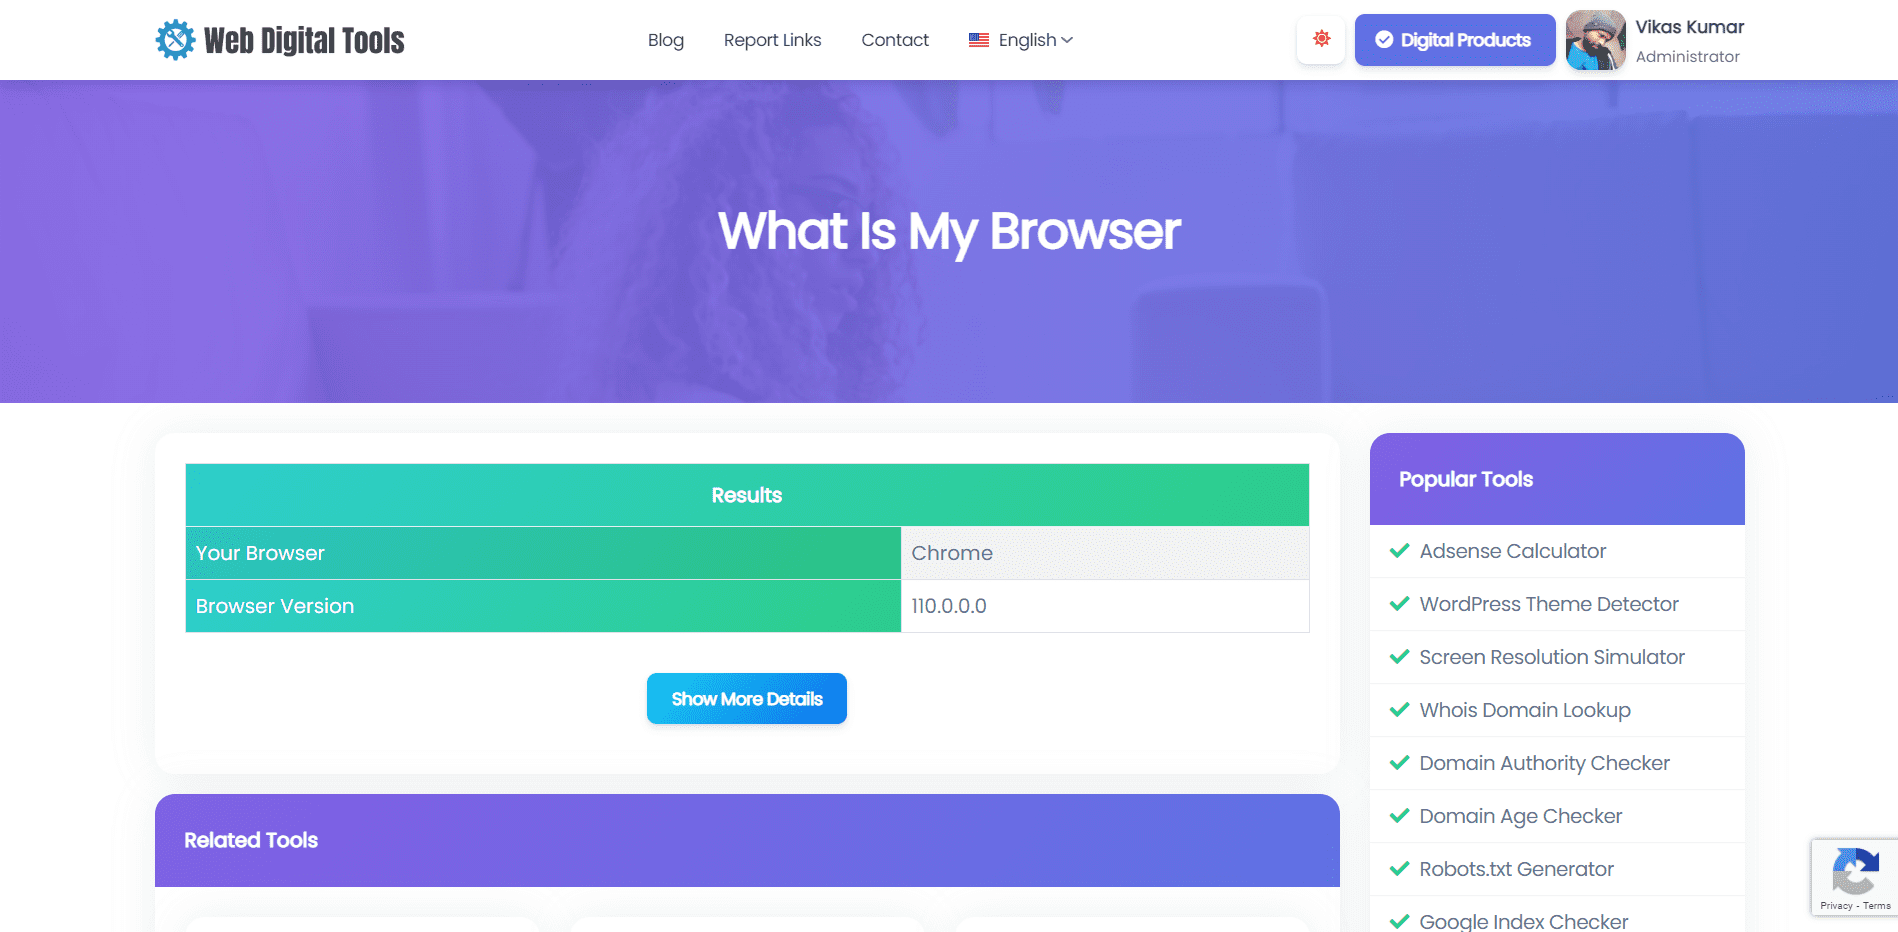 What Is My Browser